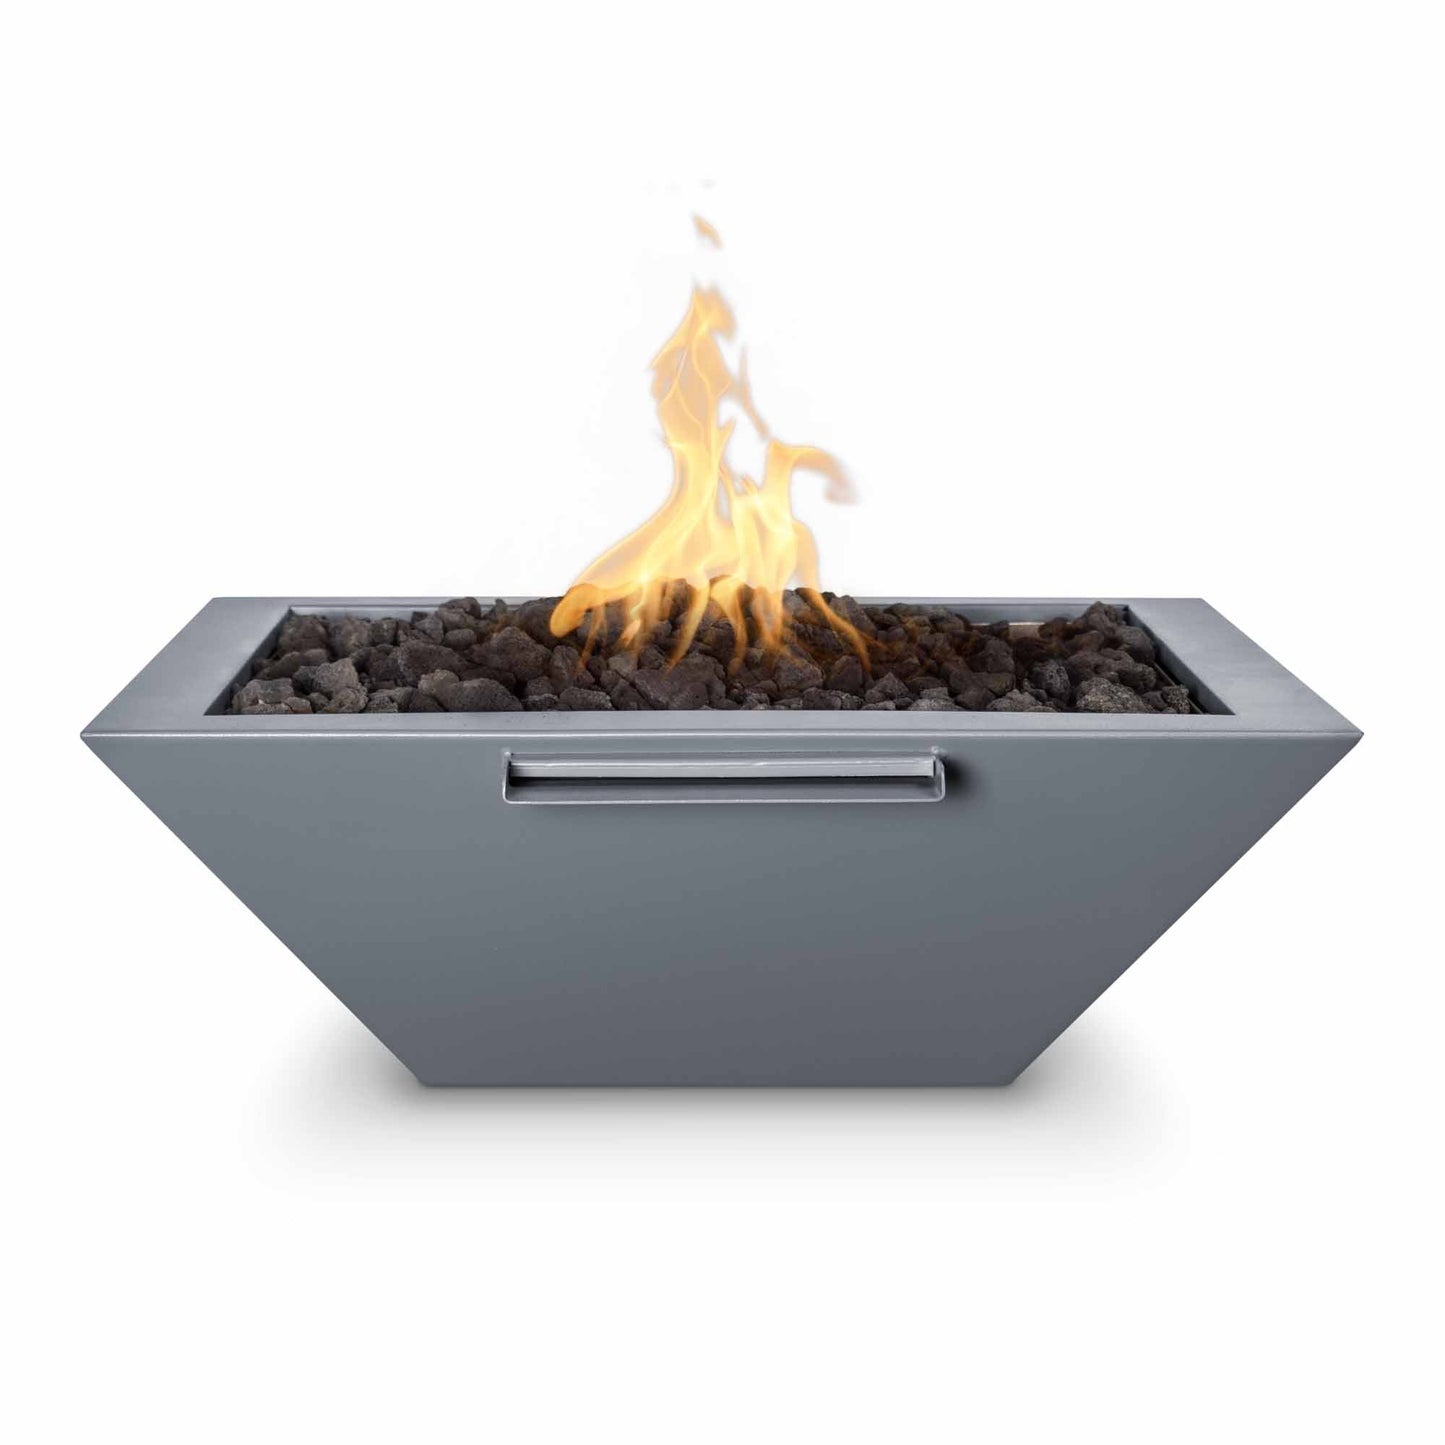 The Outdoor Plus Square Maya 24" Copper Vein Powder Coated Metal Liquid Propane Fire & Water Bowl with Match Lit with Flame Sense Ignition